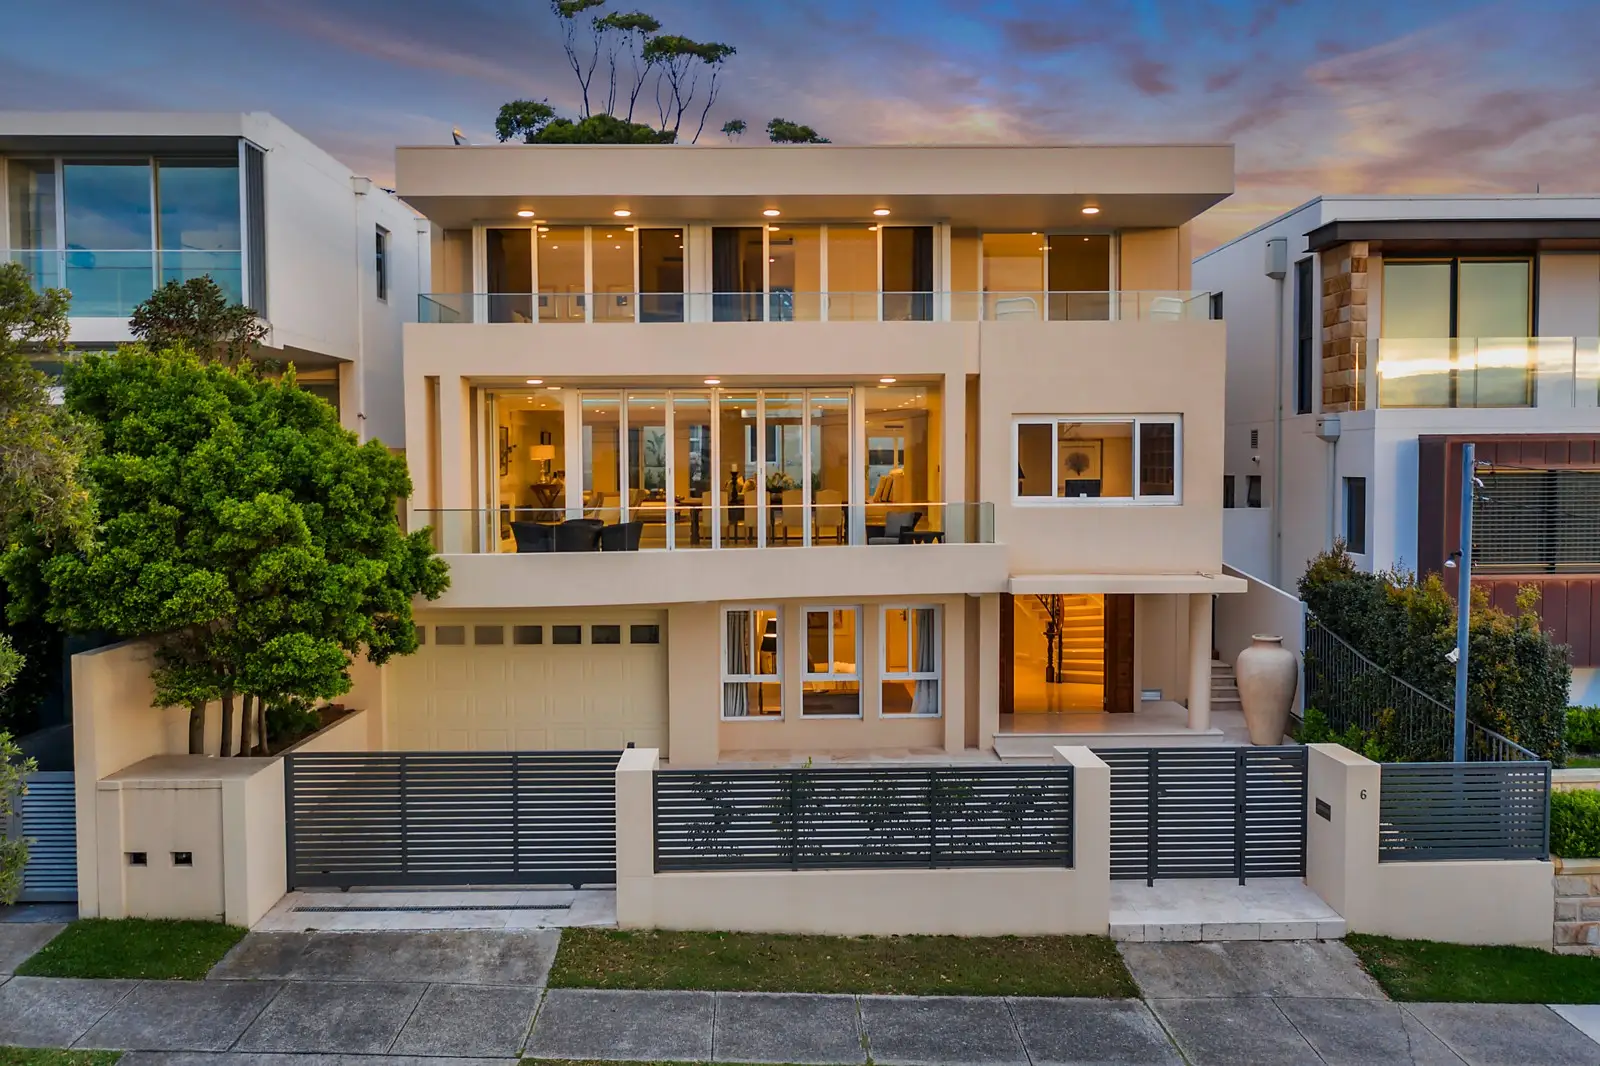 Photo #1: 6 Gilbert Street, Dover Heights - Sold by Sydney Sotheby's International Realty